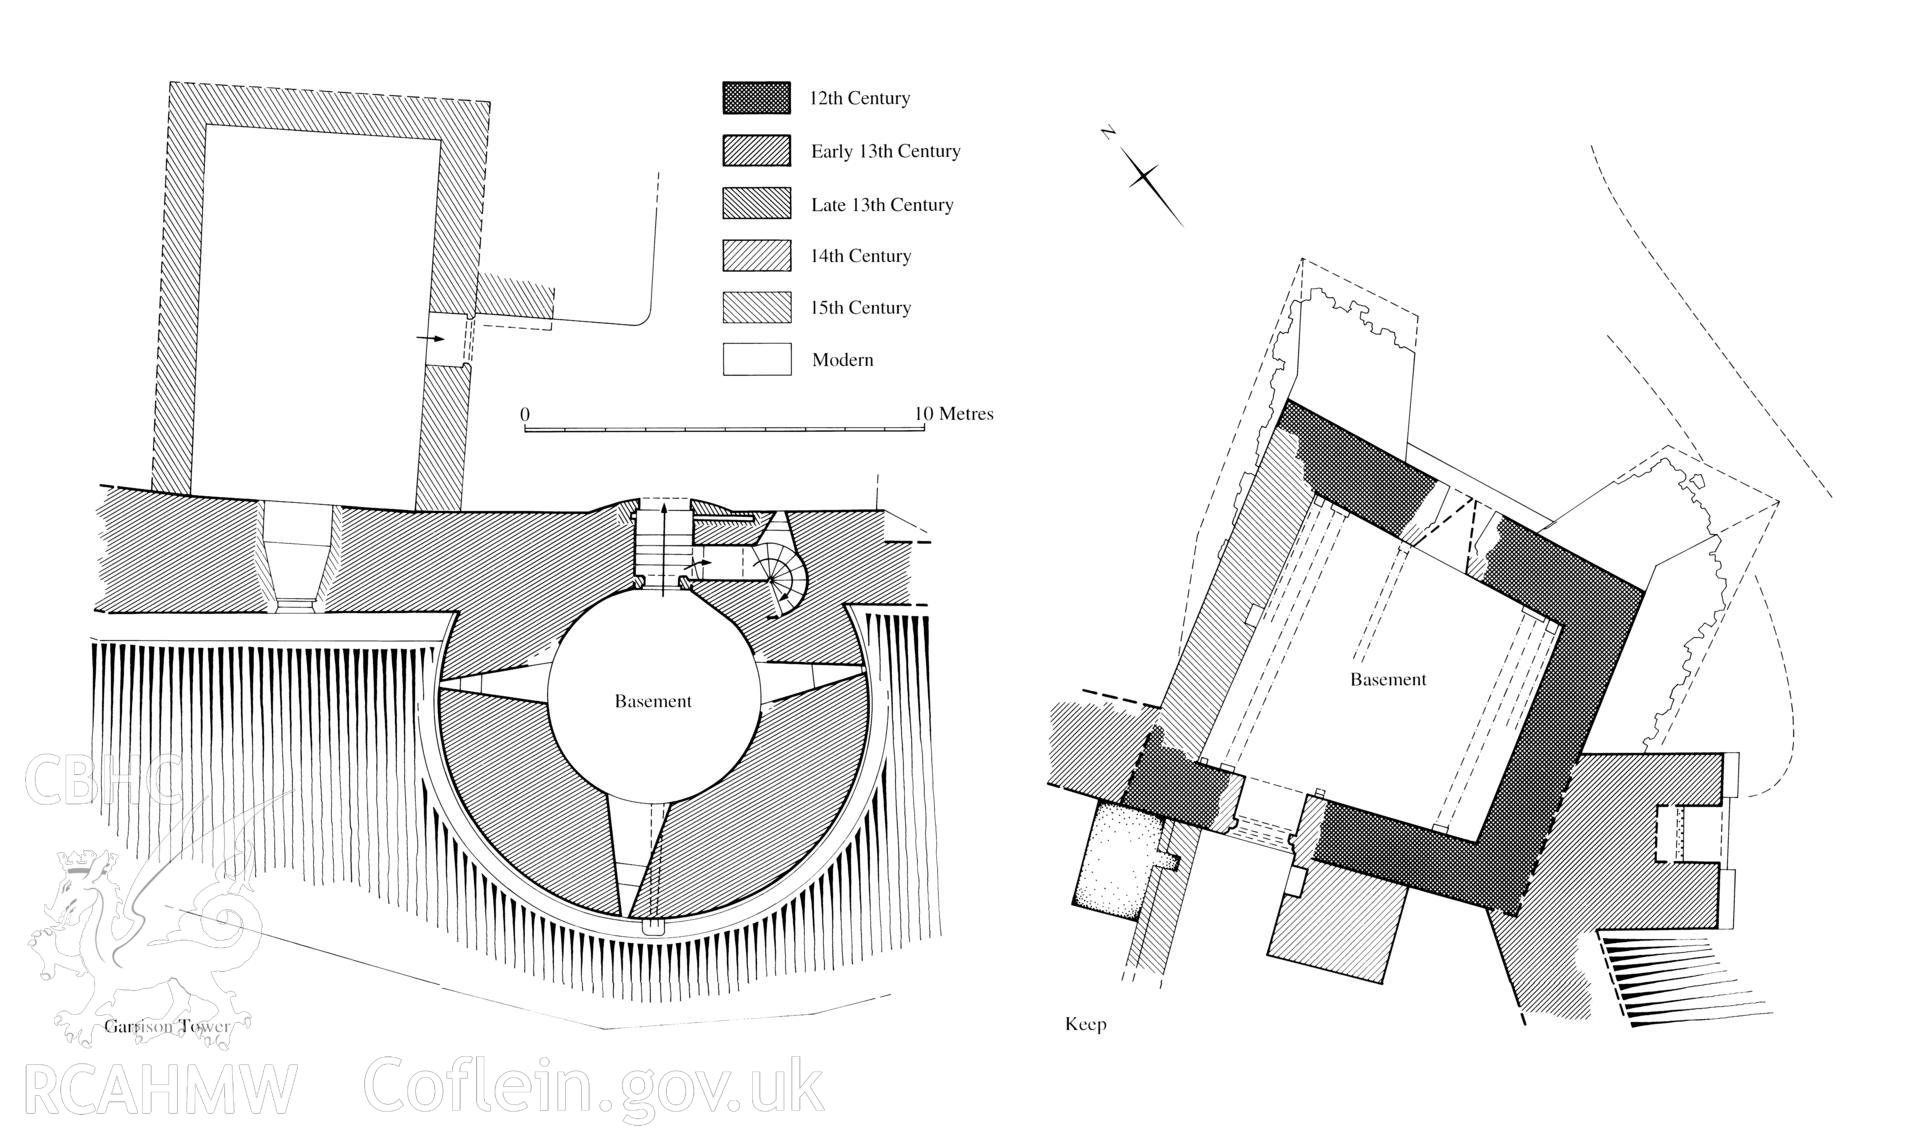 Usk Castle; measured plan produced by D.J. Roberts, showing  building phases of the basement.